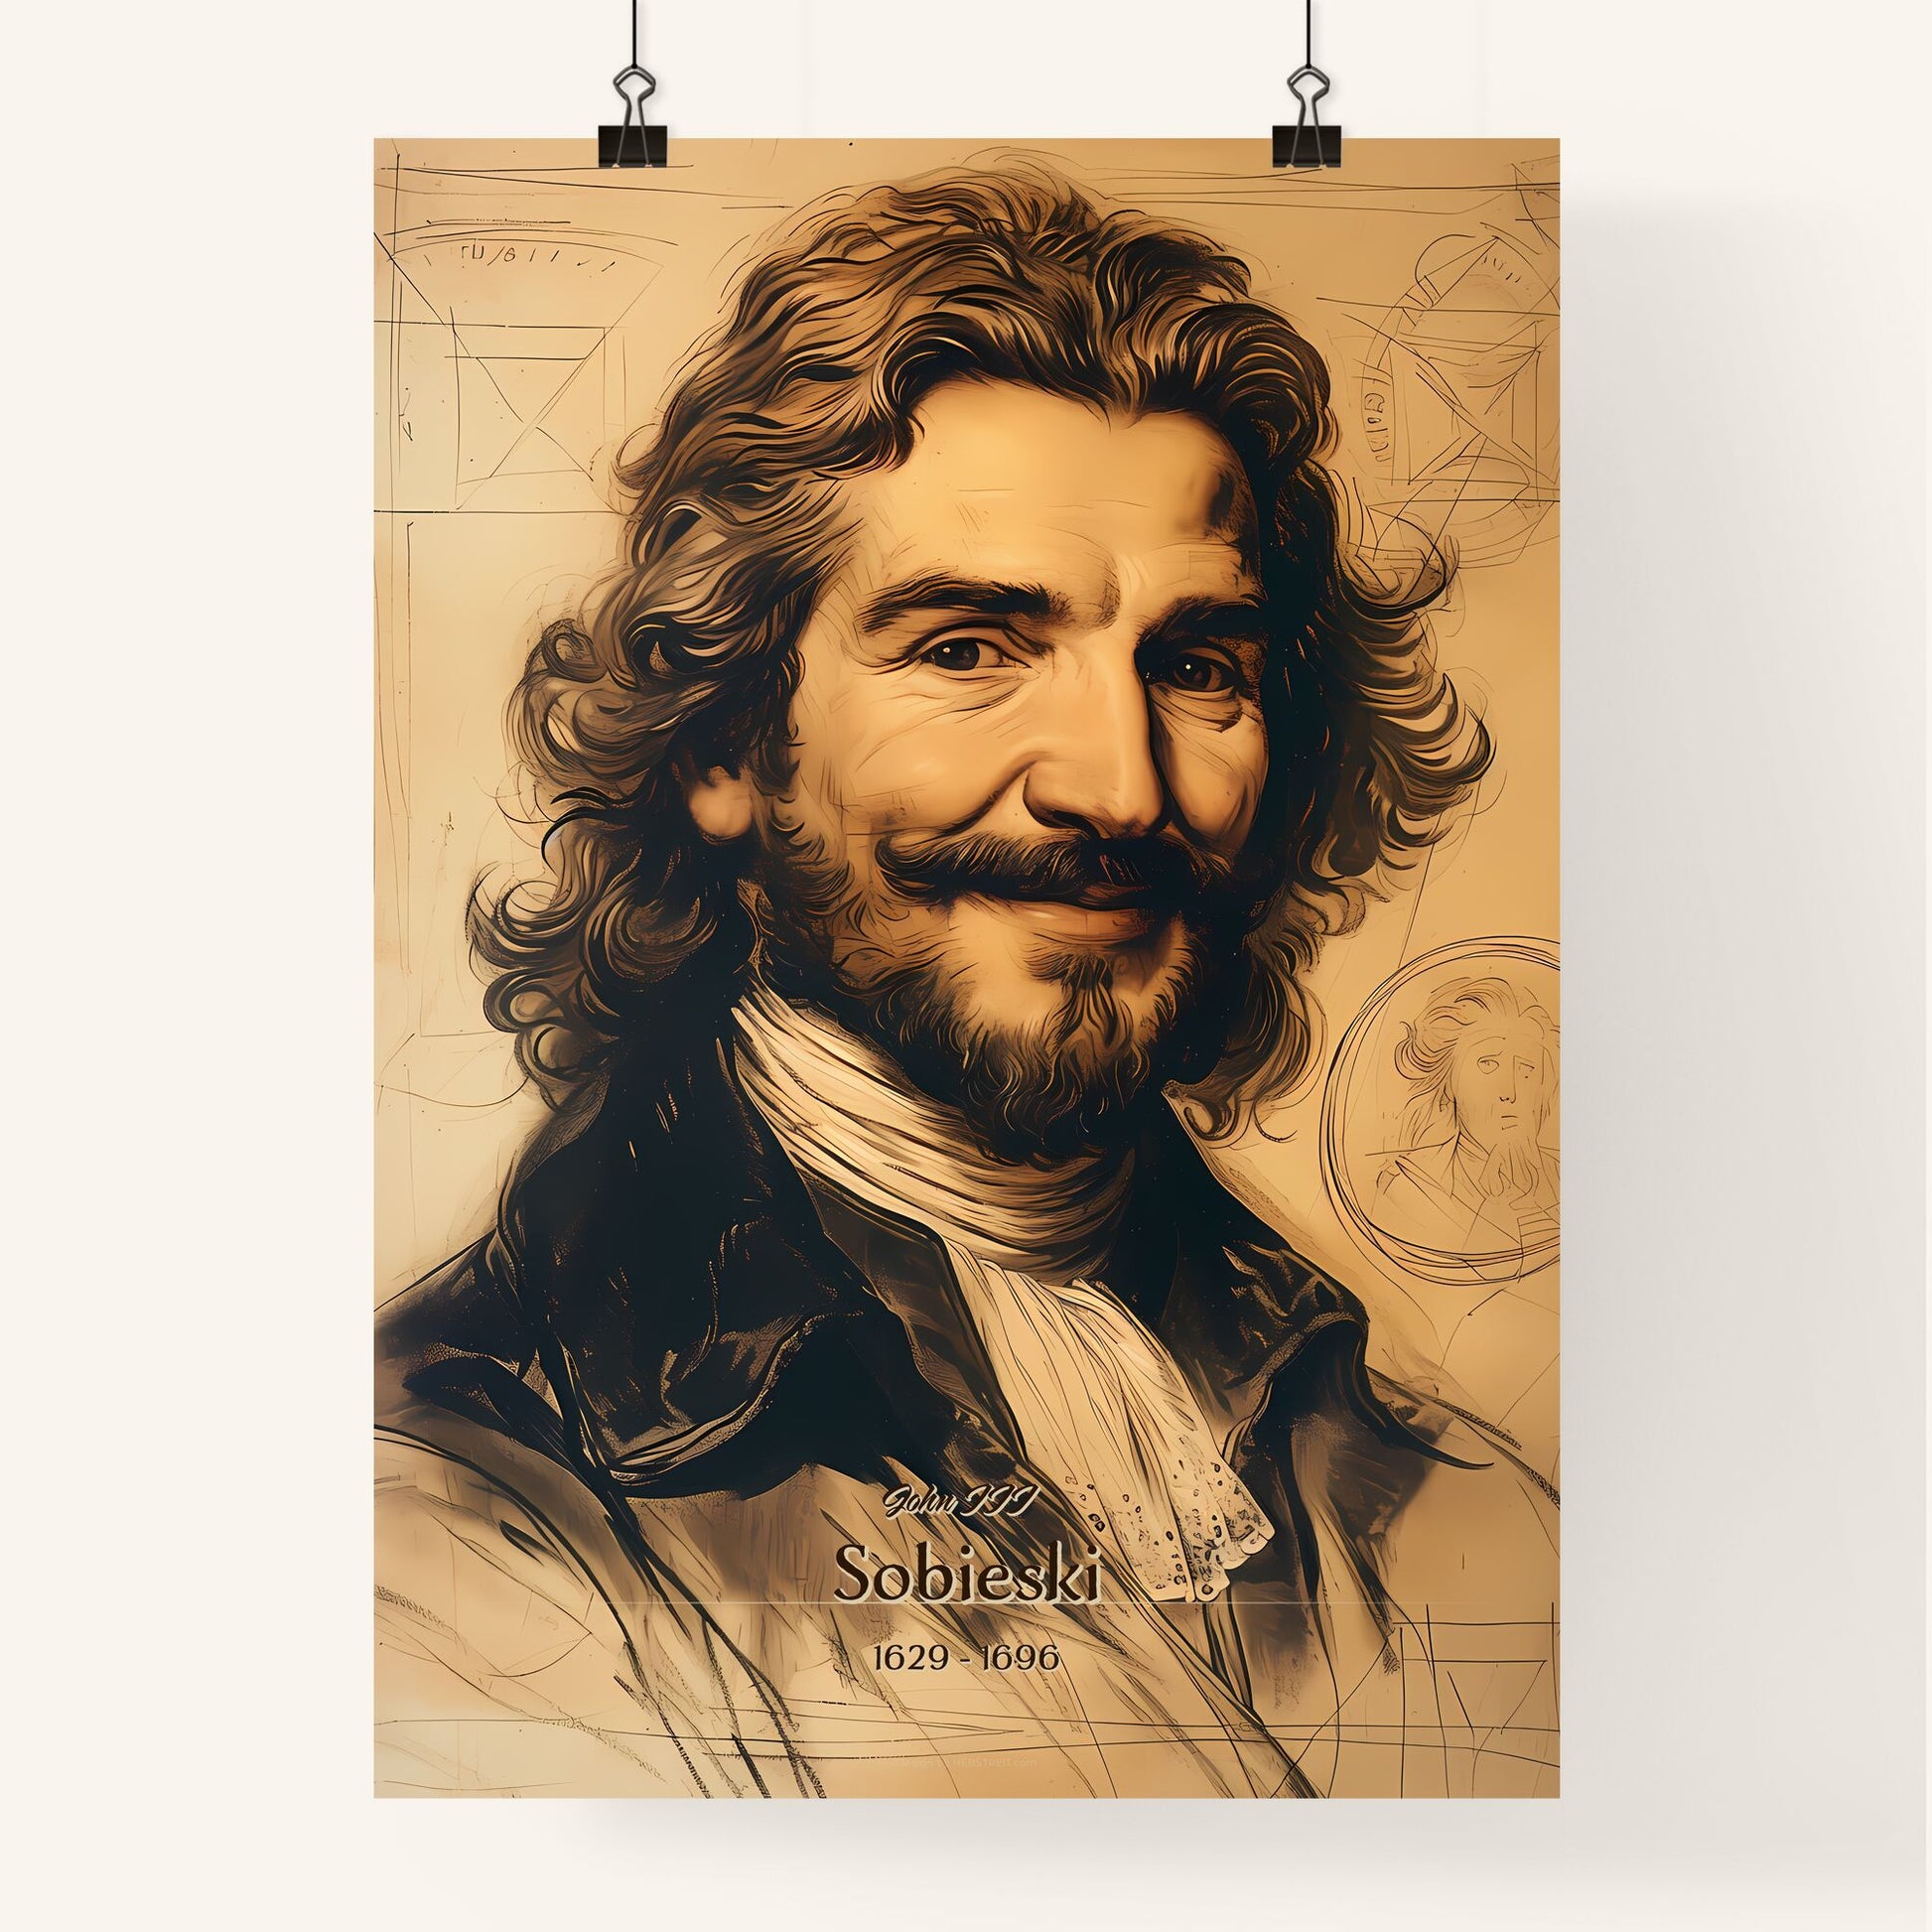 John III , Sobieski, 1629 - 1696, A Poster of a drawing of a man with long hair Default Title